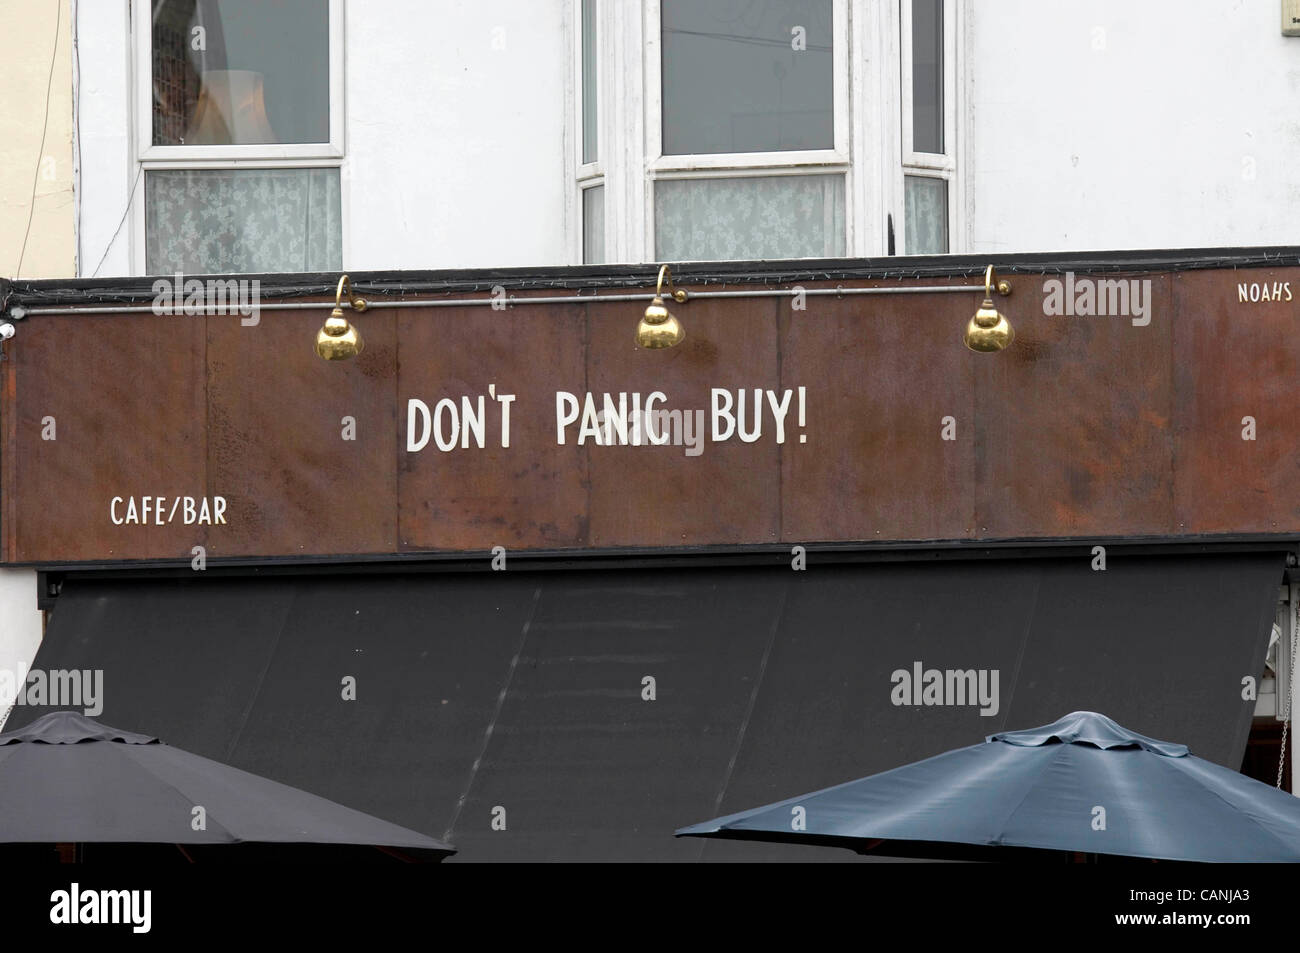 Swansea, UK. 31 Mar, 2012. Sign above Noah's Yard bar in the Uplands district of Swansea saying 'Don't Panic Buy' in reference to the fuel crisis. Stock Photo